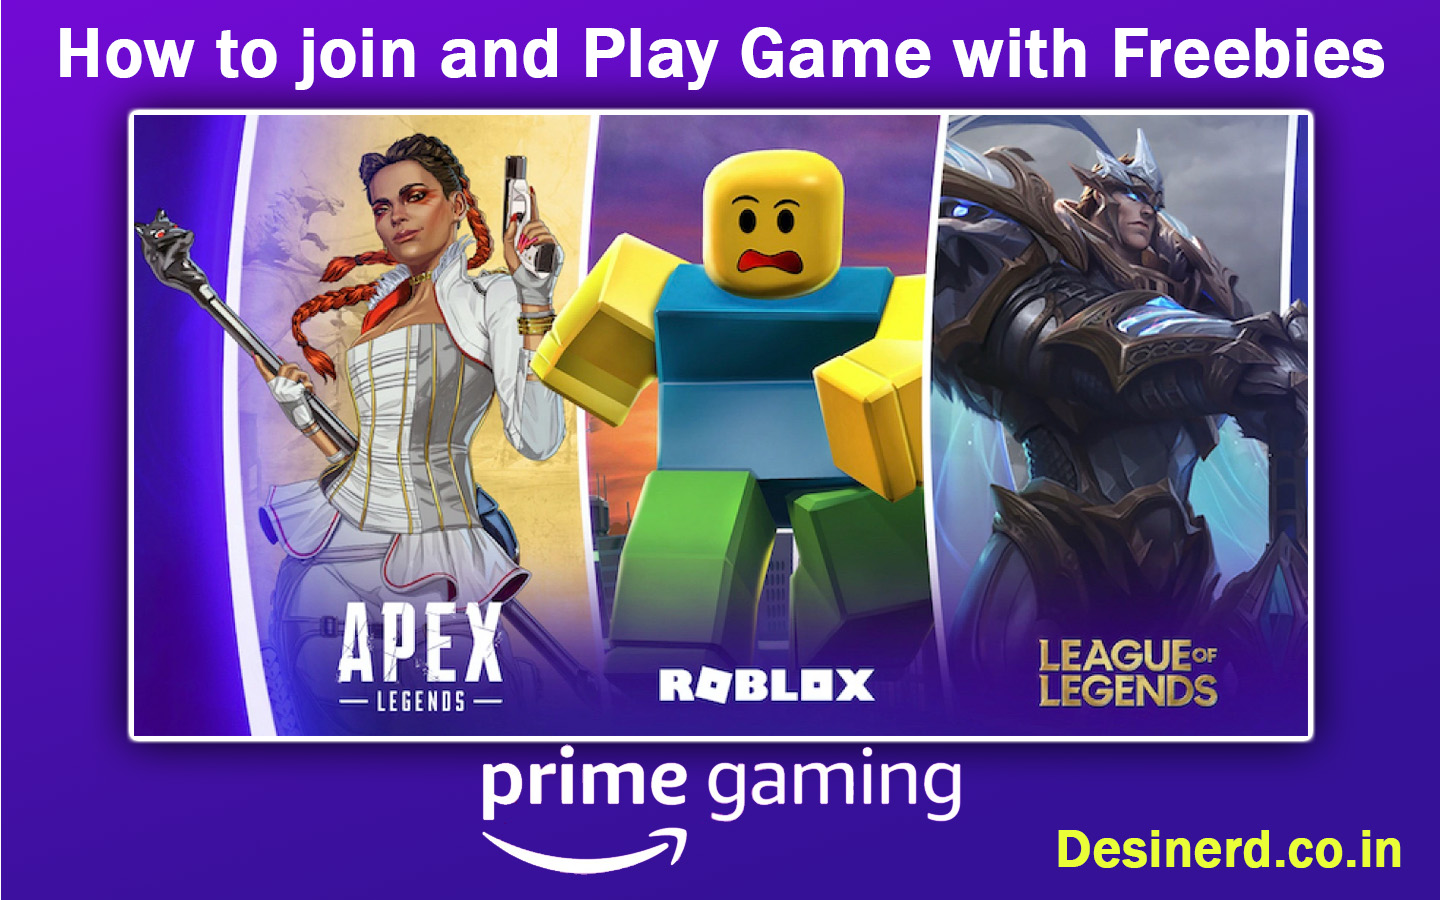 Amazon Prime Gaming: How to join and Play Game with Freebies